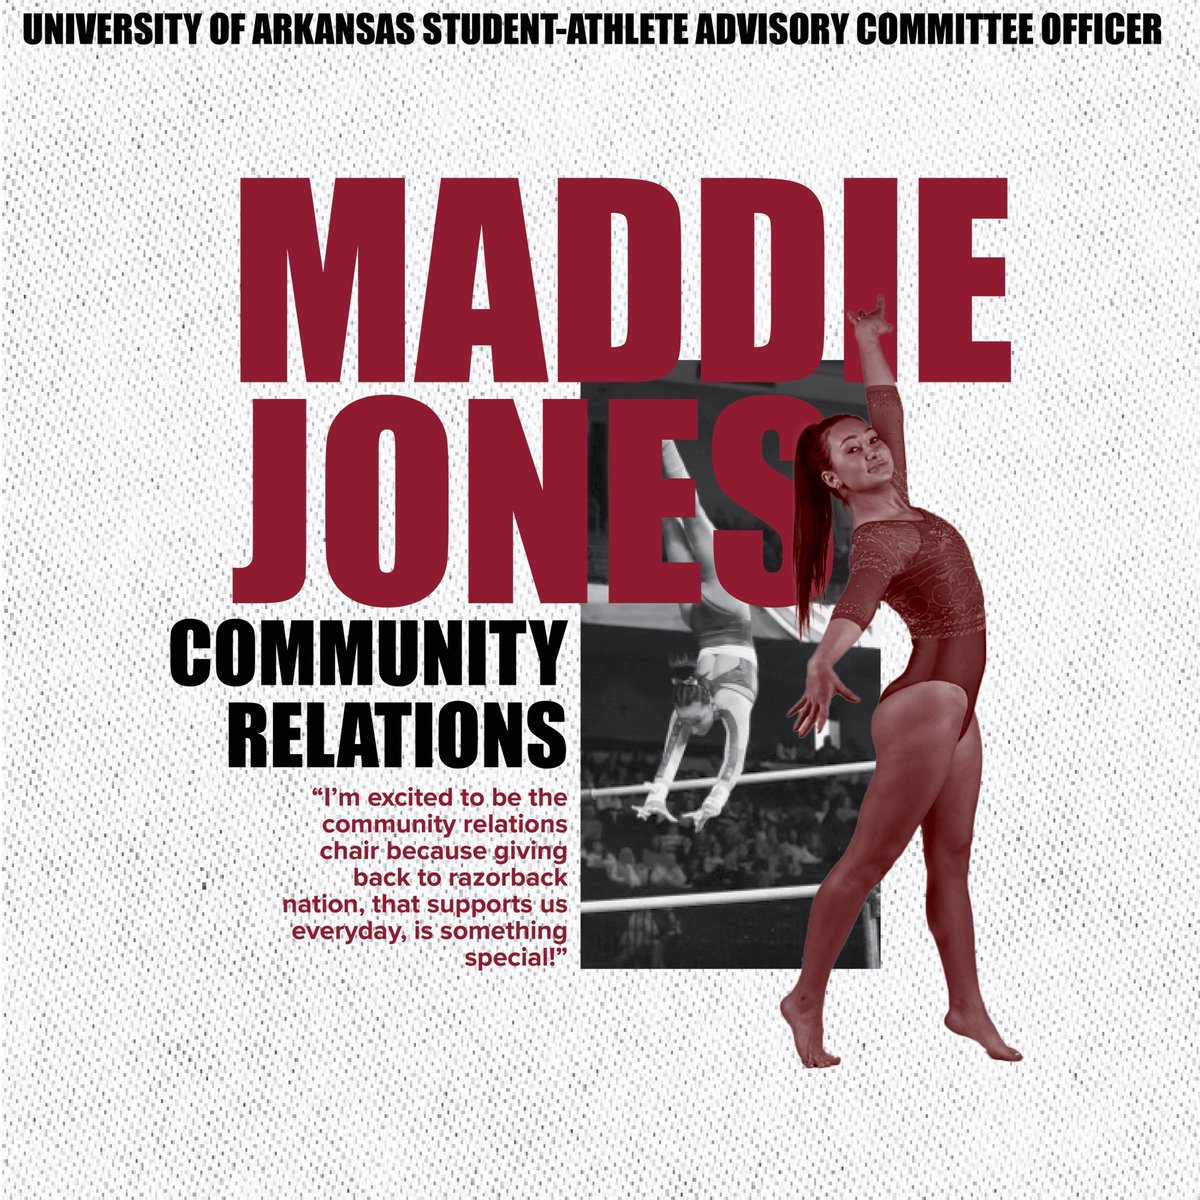 We are so excited to announce that @maddiejonzz will be our Community Relations Chair next year! Congrats, Maddie! #SAAC #RazorbackNation